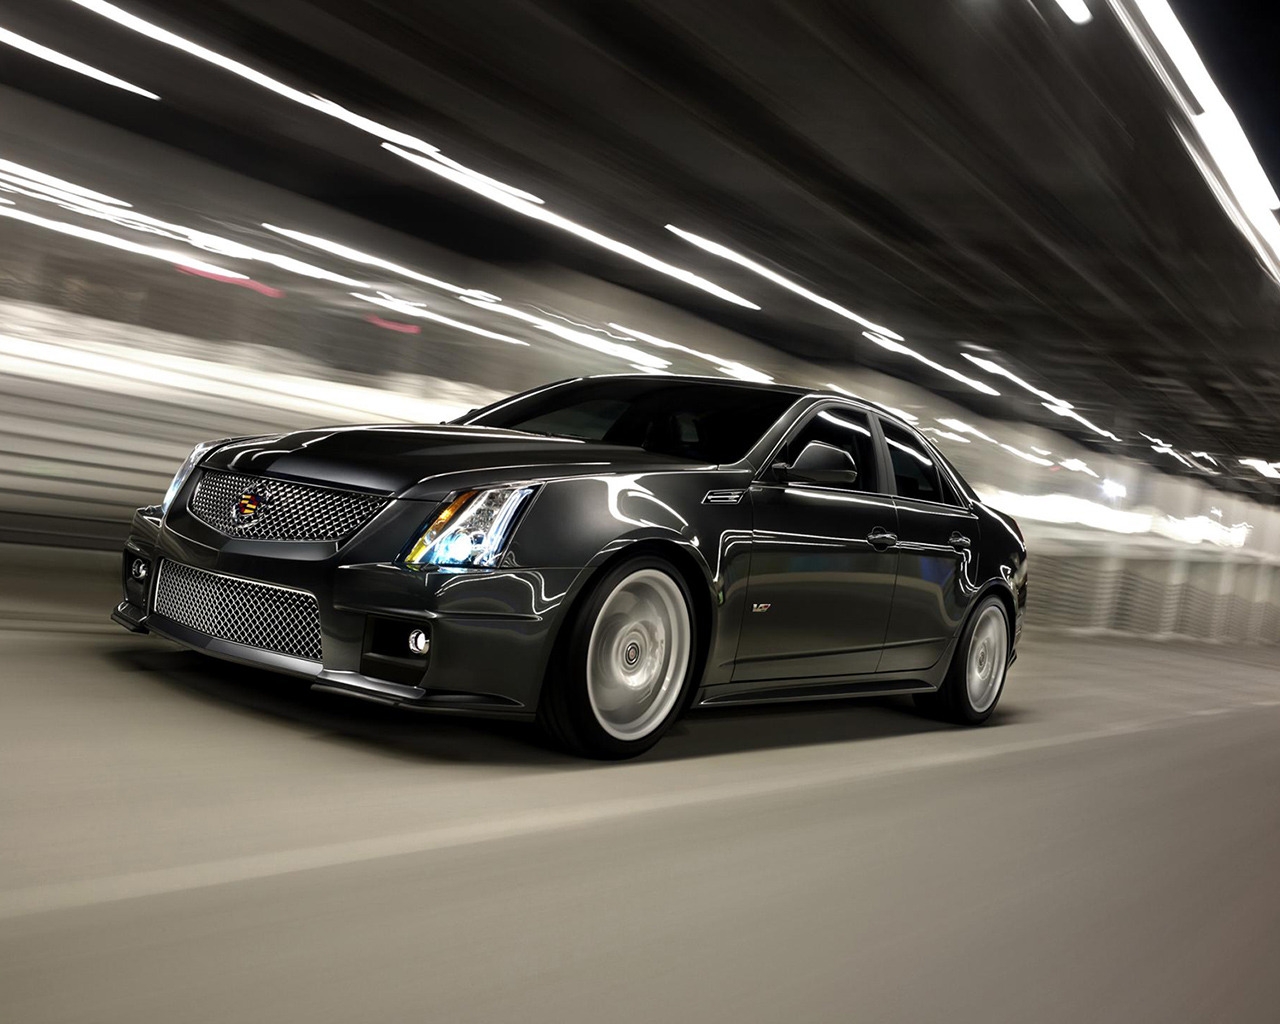 Cadillac CTS 2013 for 1280 x 1024 resolution